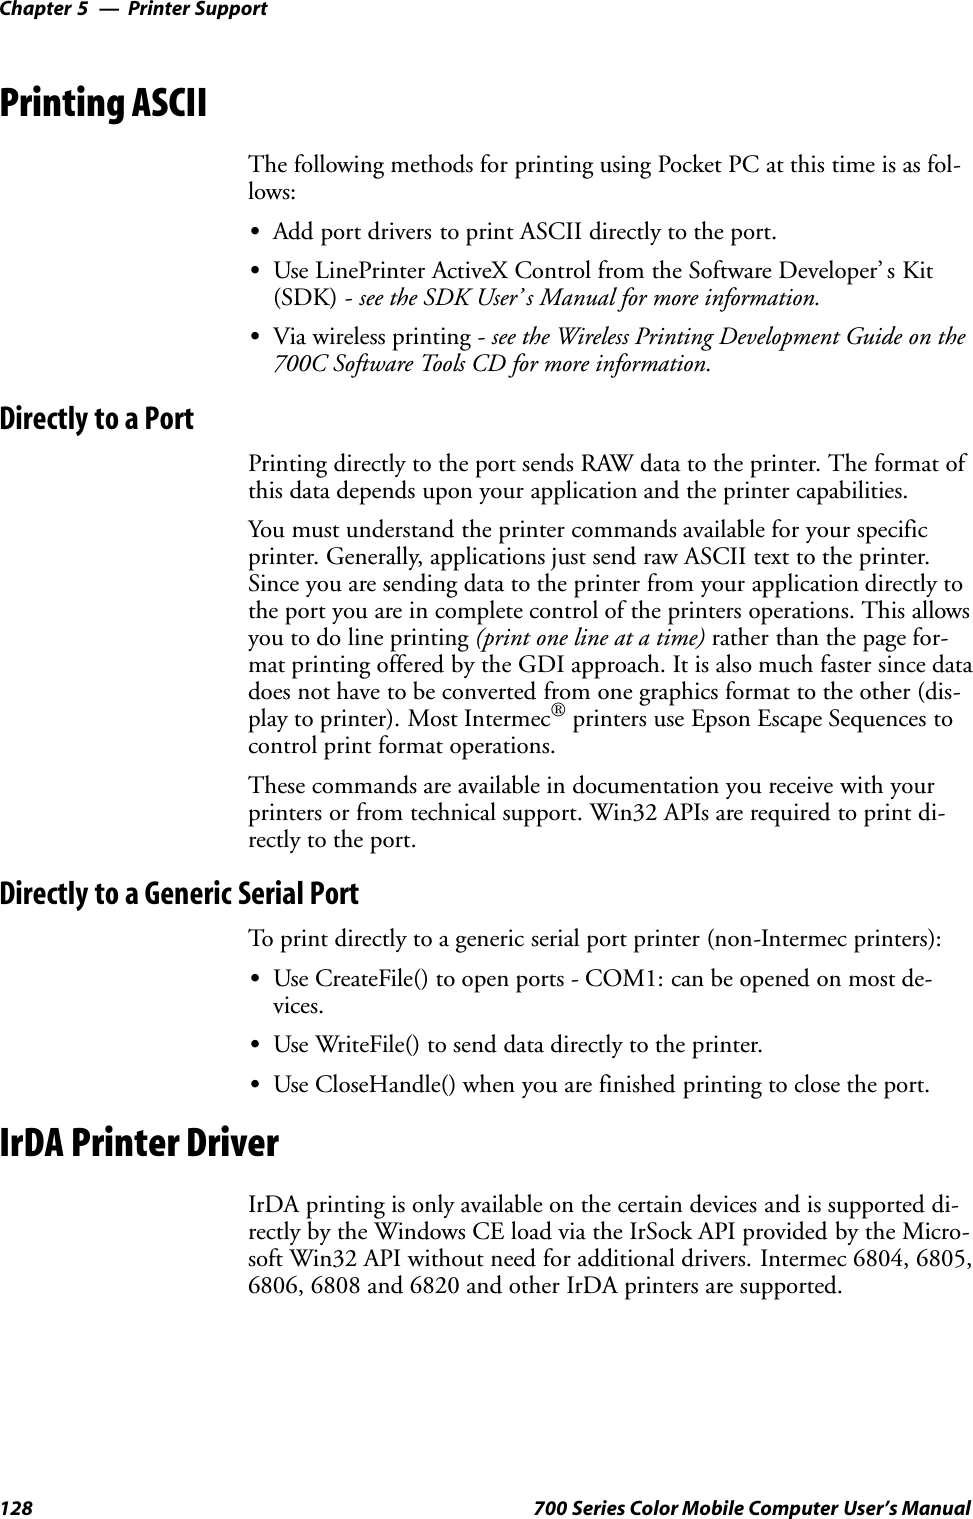 Printer SupportChapter —5128 700 Series Color Mobile Computer User’s ManualPrinting ASCIIThe following methods for printing using Pocket PC at this time is as fol-lows:SAdd port drivers to print ASCII directly to the port.SUse LinePrinter ActiveX Control from the Software Developer’ s Kit(SDK) - see the SDK User’ s Manual for more information.SVia wireless printing - see the Wireless Printing Development Guide on the700C Software Tools CD for more information.Directly to a PortPrinting directly to the port sends RAW data to the printer. The format ofthis data depends upon your application and the printer capabilities.You must understand the printer commands available for your specificprinter. Generally, applications just send raw ASCII text to the printer.Since you are sending data to the printer from your application directly tothe port you are in complete control of the printers operations. This allowsyou to do line printing (print one line at a time) rather than the page for-mat printing offered by the GDI approach. It is also much faster since datadoes not have to be converted from one graphics format to the other (dis-play to printer). Most Intermecprinters use Epson Escape Sequences tocontrol print format operations.These commands are available in documentation you receive with yourprinters or from technical support. Win32 APIs are required to print di-rectly to the port.Directly to a Generic Serial PortTo print directly to a generic serial port printer (non-Intermec printers):SUse CreateFile() to open ports - COM1: can be opened on most de-vices.SUse WriteFile() to send data directly to the printer.SUse CloseHandle() when you are finished printing to close the port.IrDA Printer DriverIrDA printing is only available on the certain devices and is supported di-rectly by the Windows CE load via the IrSock API provided by the Micro-soft Win32 API without need for additional drivers. Intermec 6804, 6805,6806, 6808 and 6820 and other IrDA printers are supported.